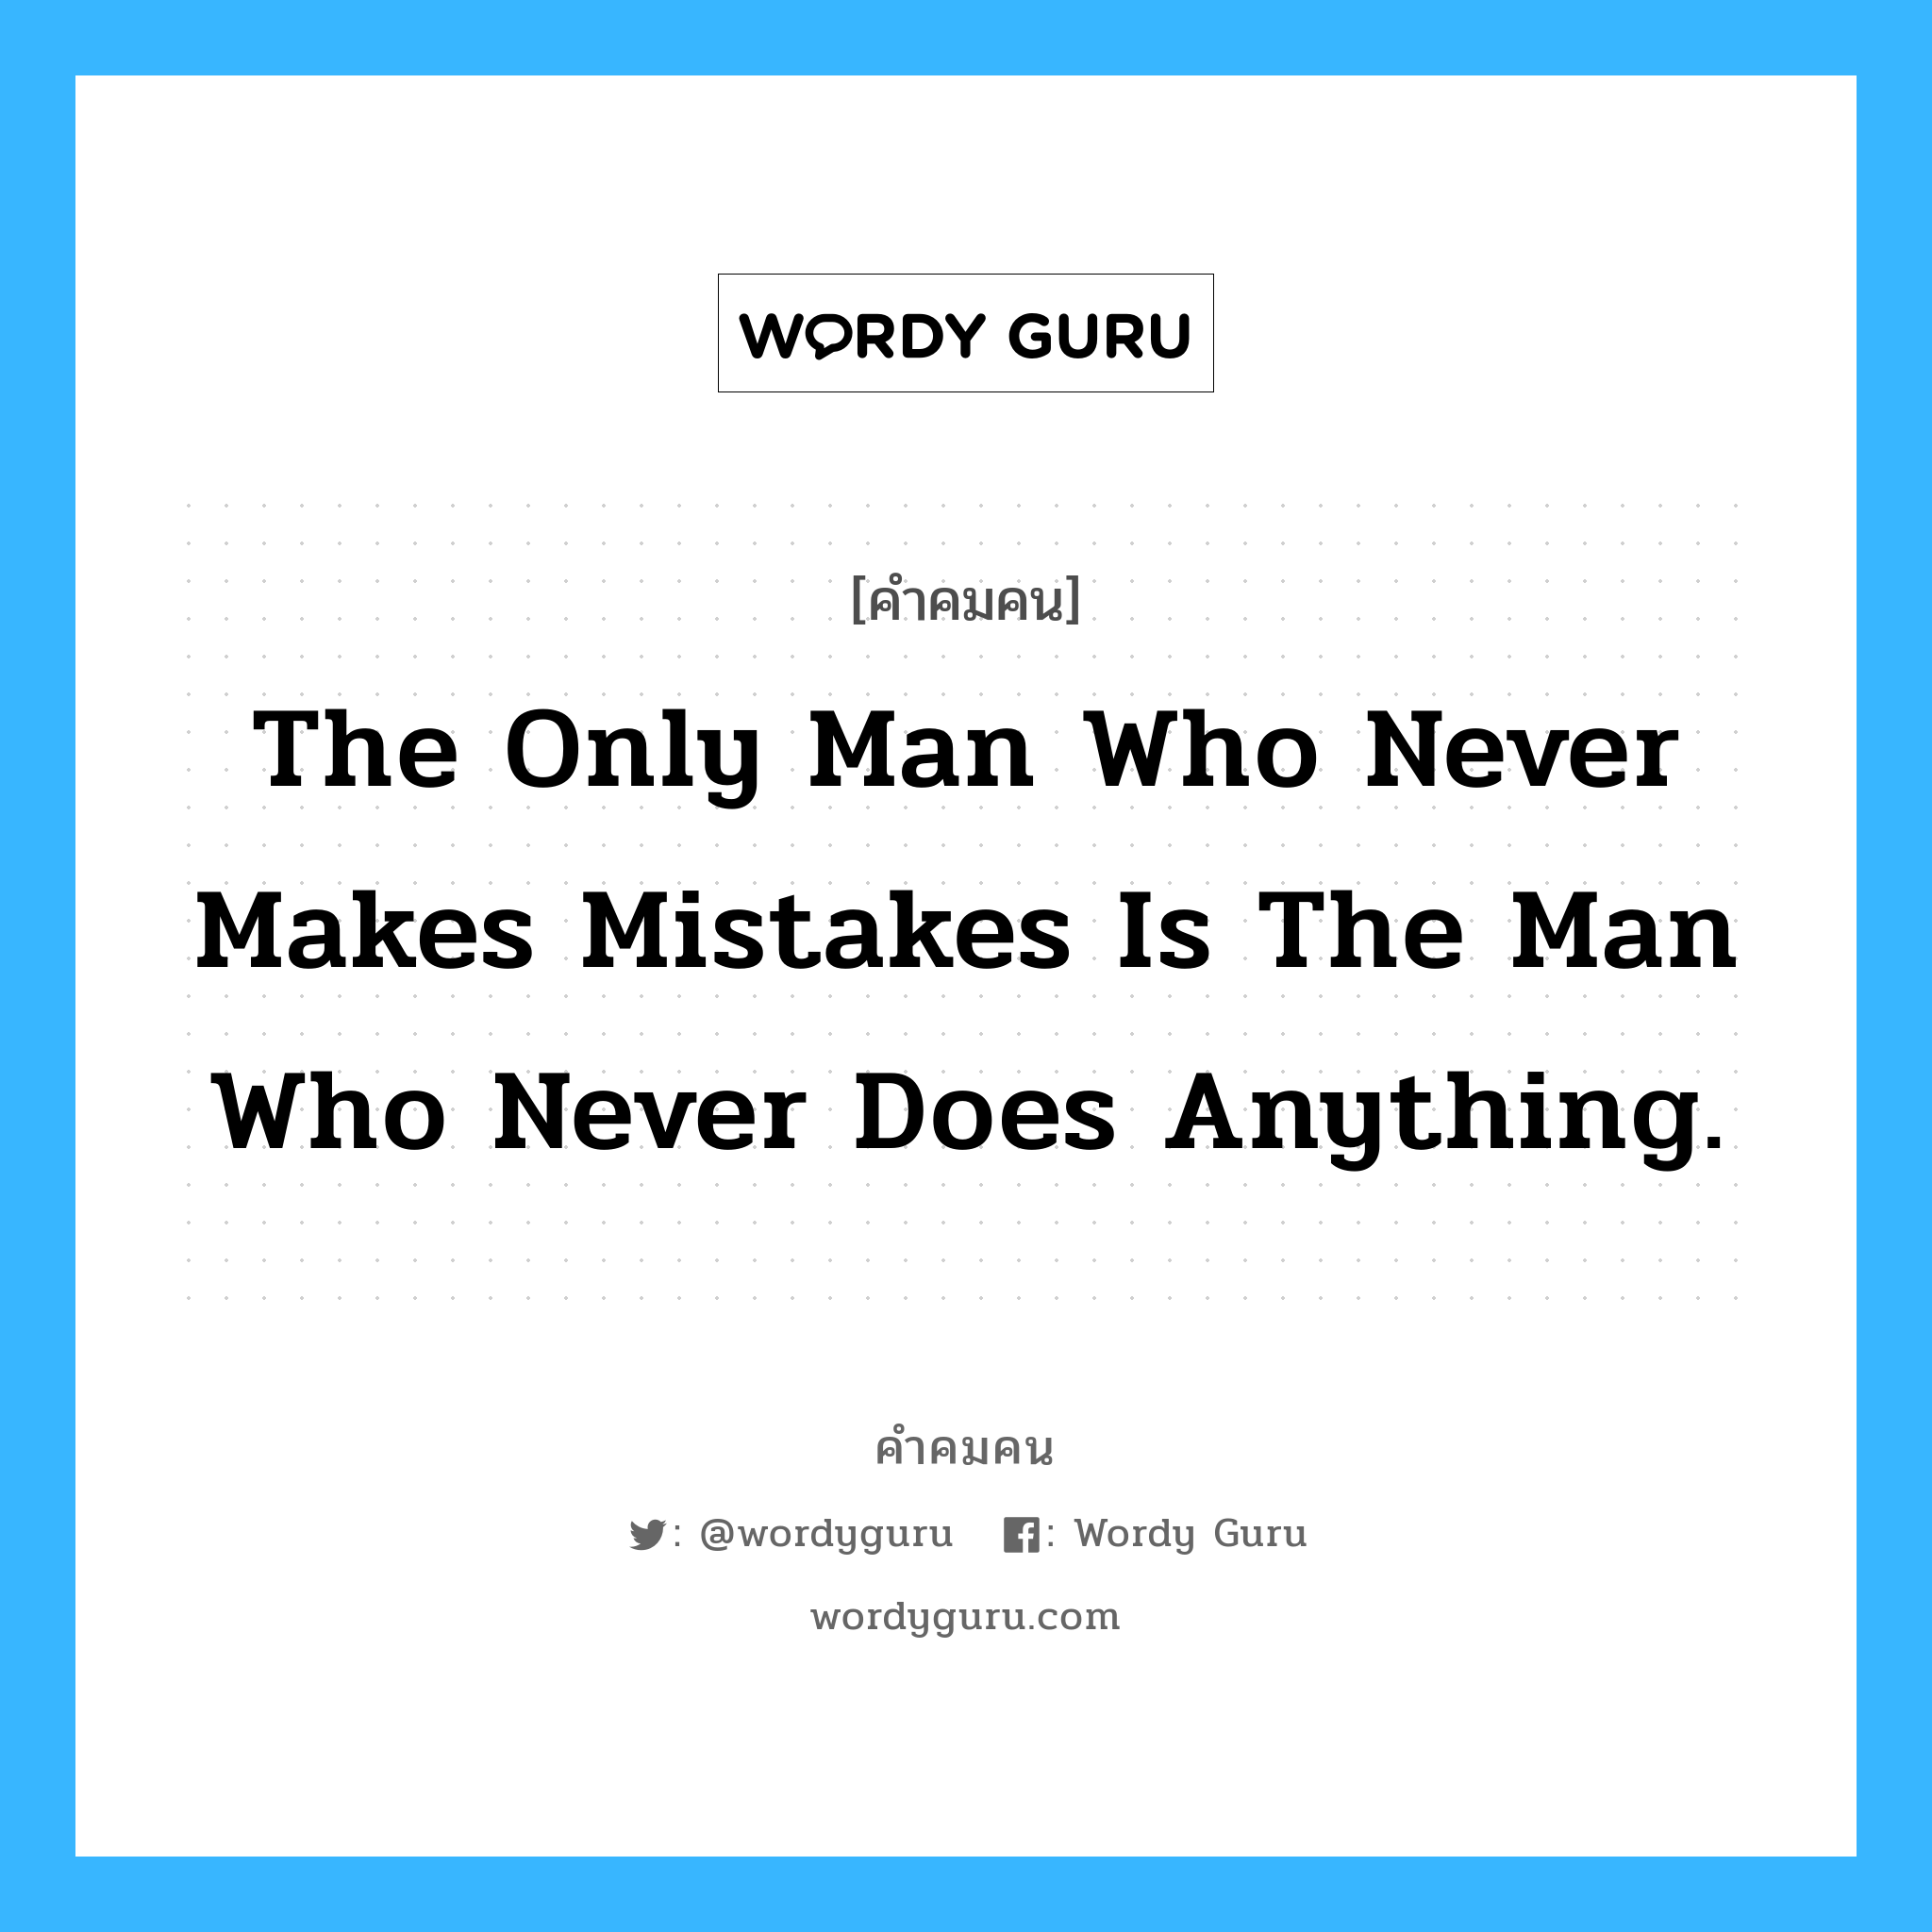 The only man who never makes mistakes is the man who never does anything., คำคมคน The only man who never makes mistakes is the man who never does anything. คนที่ไม่เคยทำผิดคือคนที่ไม่ได้ทำอะไรเลย T.Roosevelt หมวด T.Roosevelt